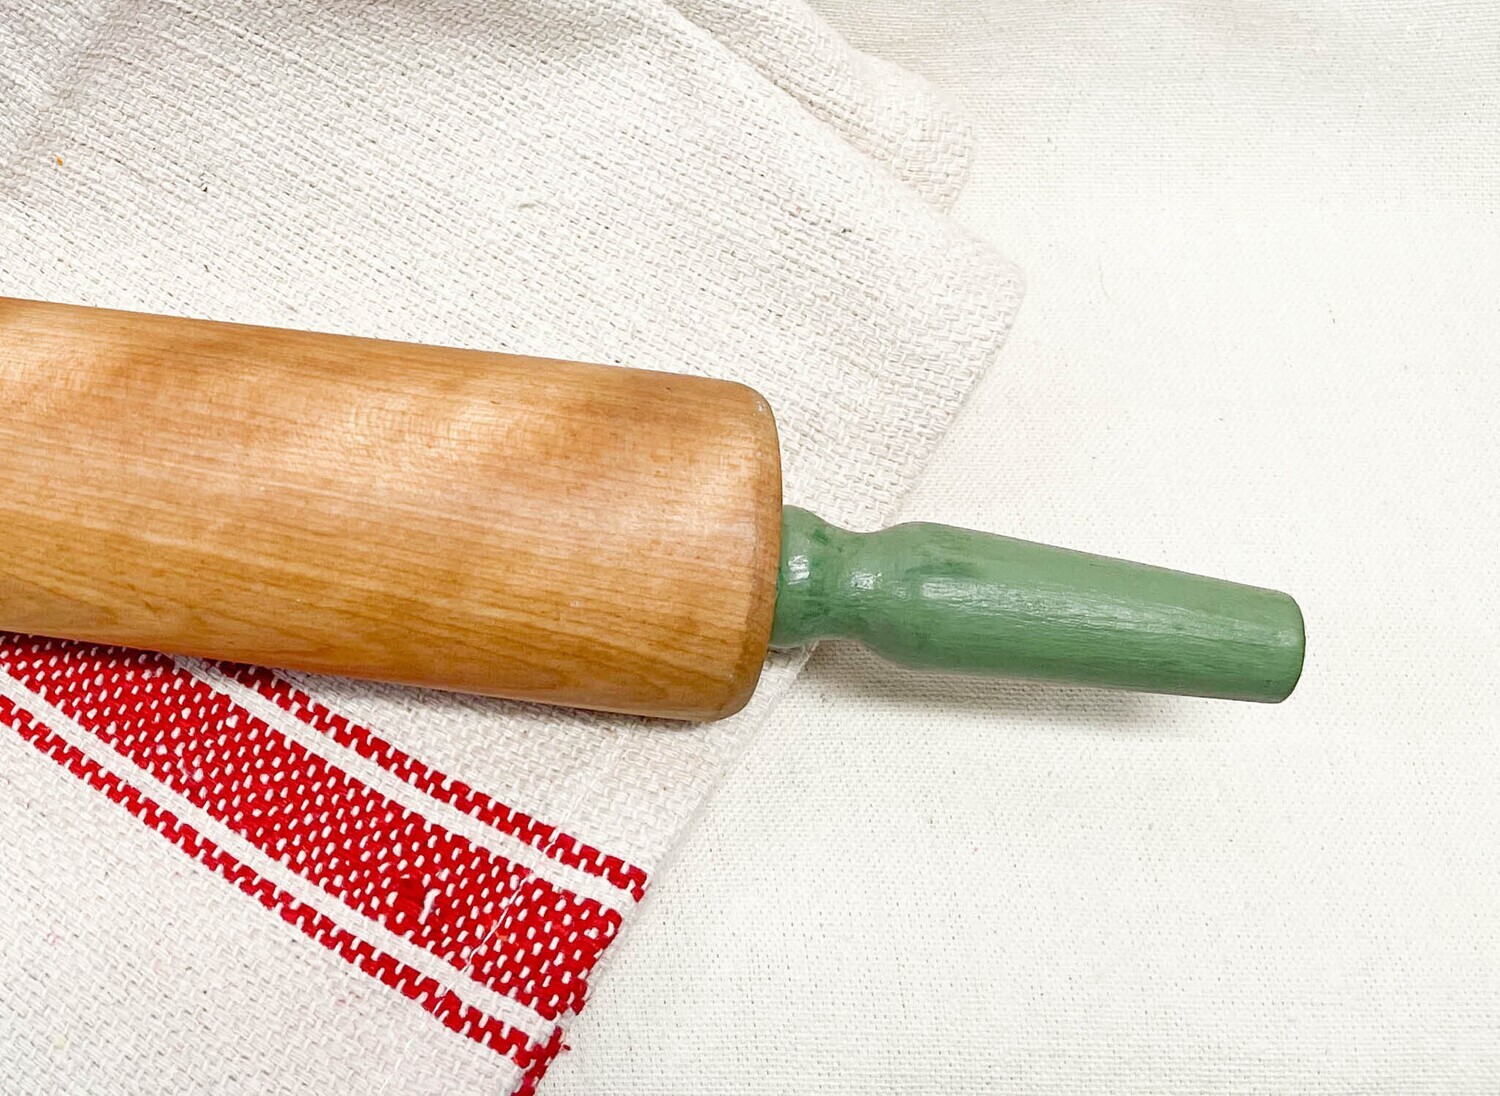 Upcycled Green Handled Wood Rolling Pin 16.25"